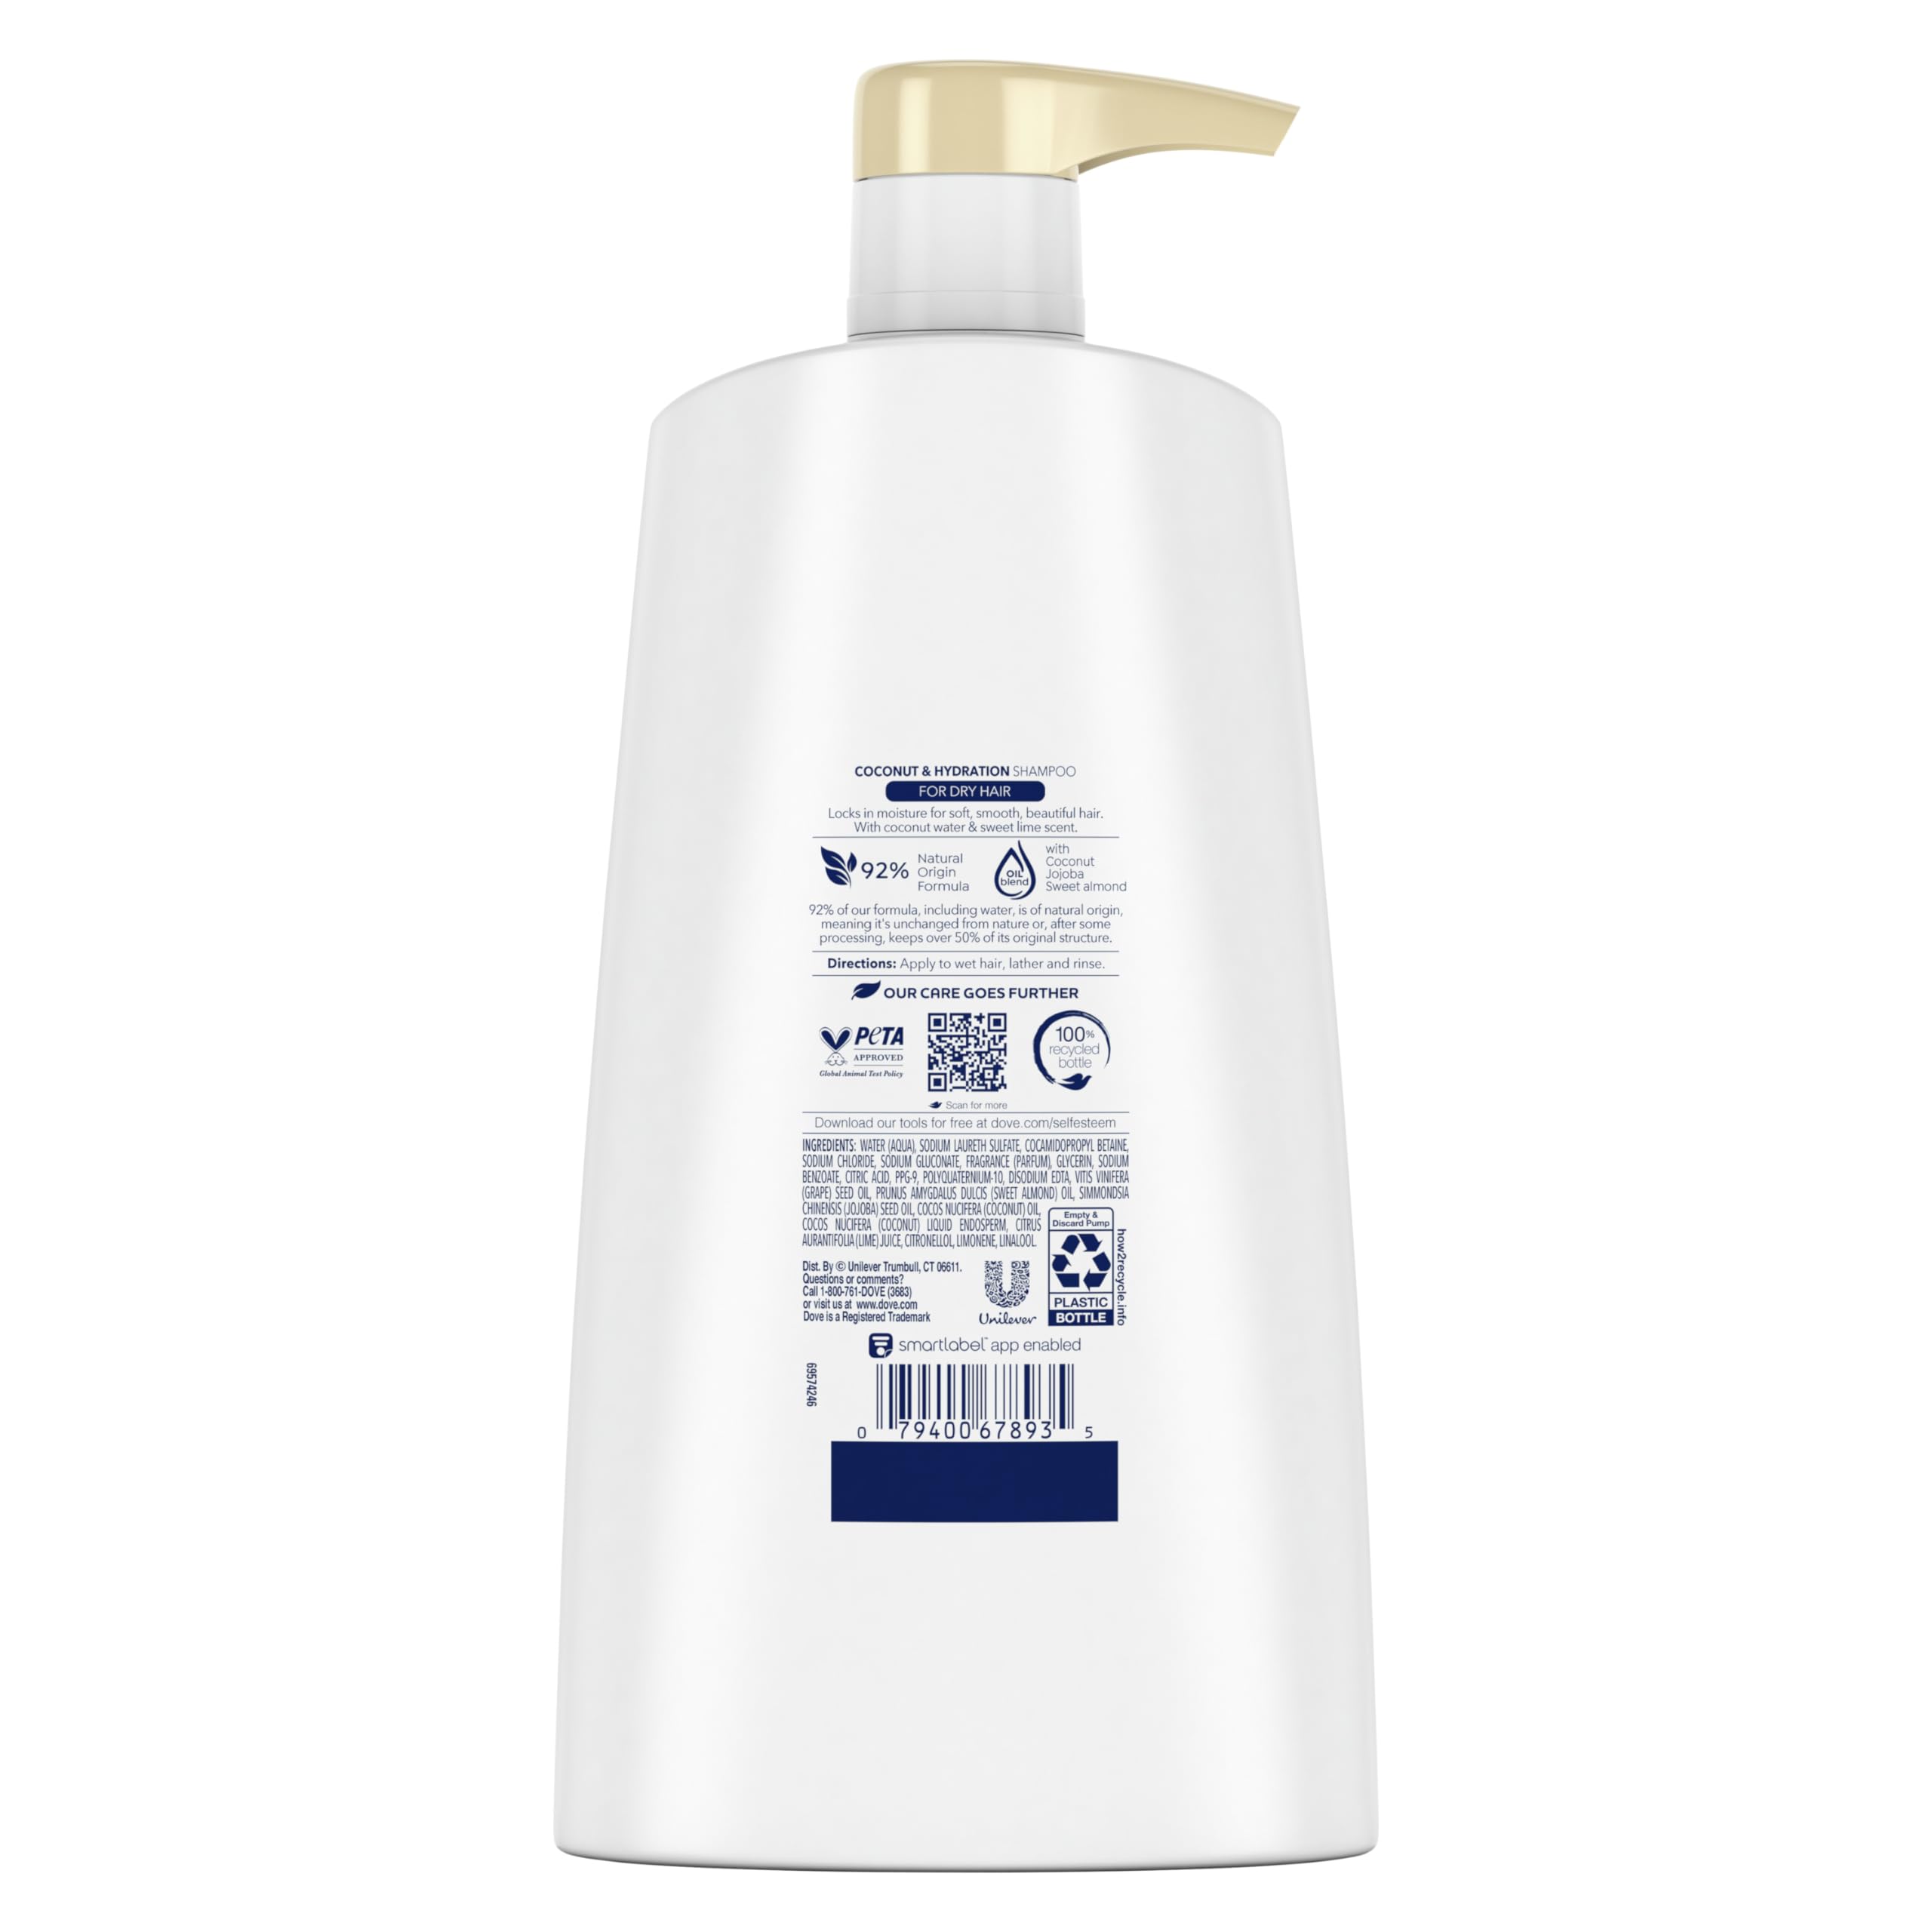 Dove Ultra Care Shampoo Coconut and Hydration for Dry Hair Shampoo with Oil Blend of Coconut, Jojoba & Sweet Almond 25.4 oz